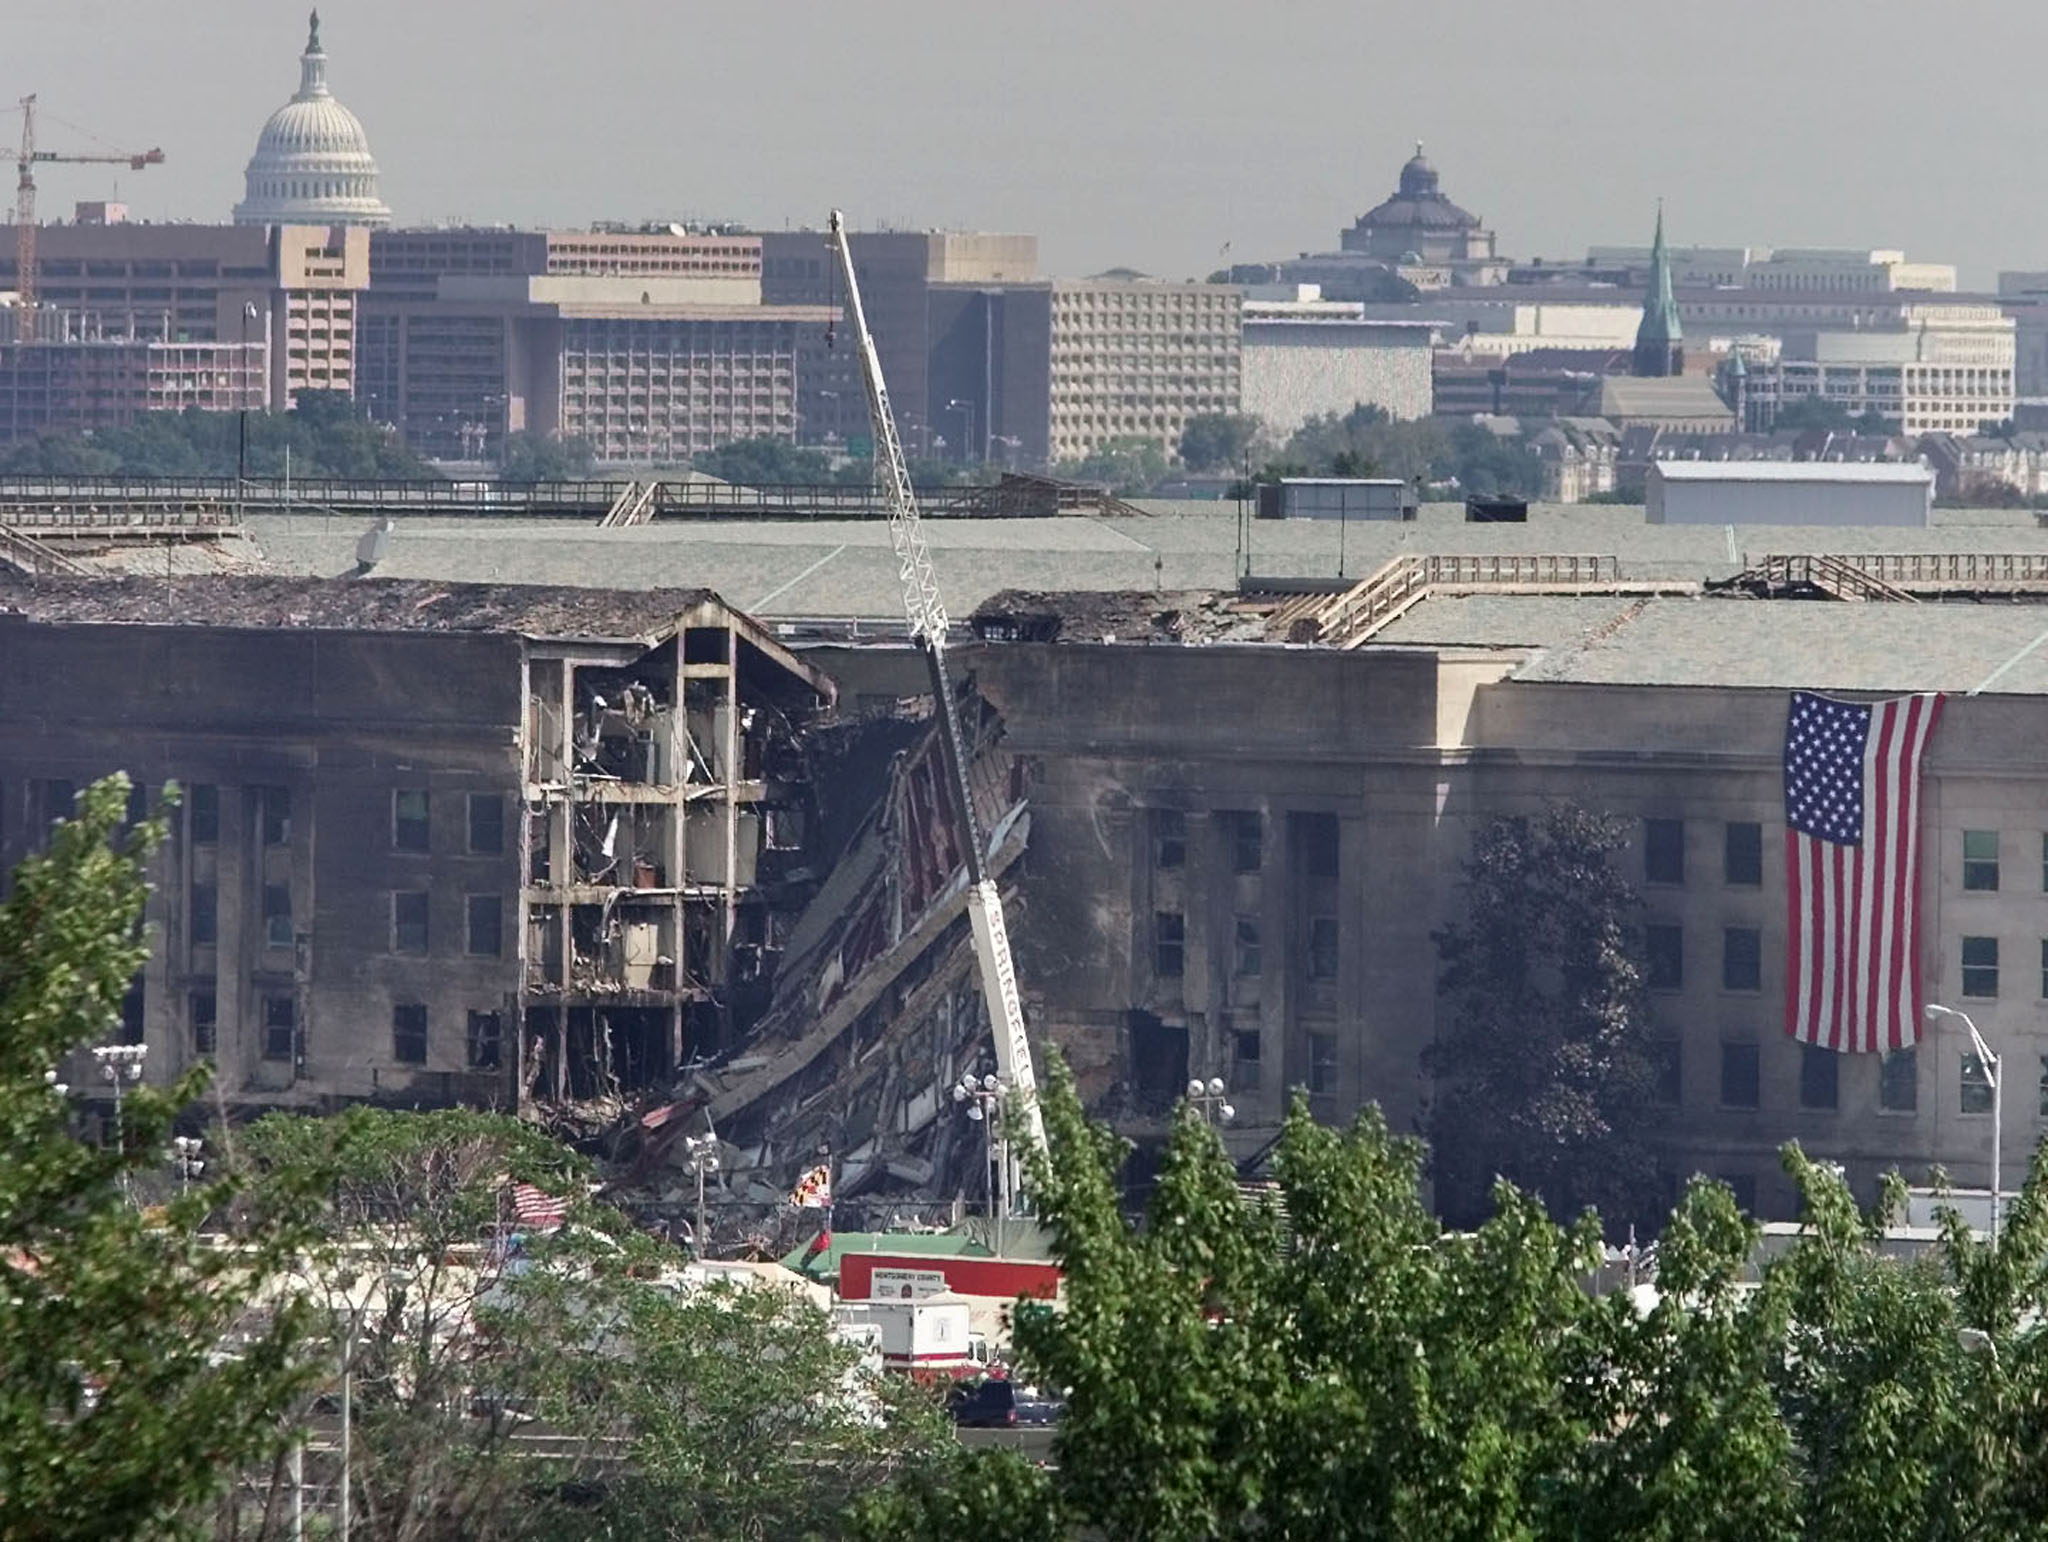 The U.S. Capitol hovers in the background over the damaged area of the Pentagon building, September 13, 2001. (Photo: REUTERS/Larry Downing/ Newscom)